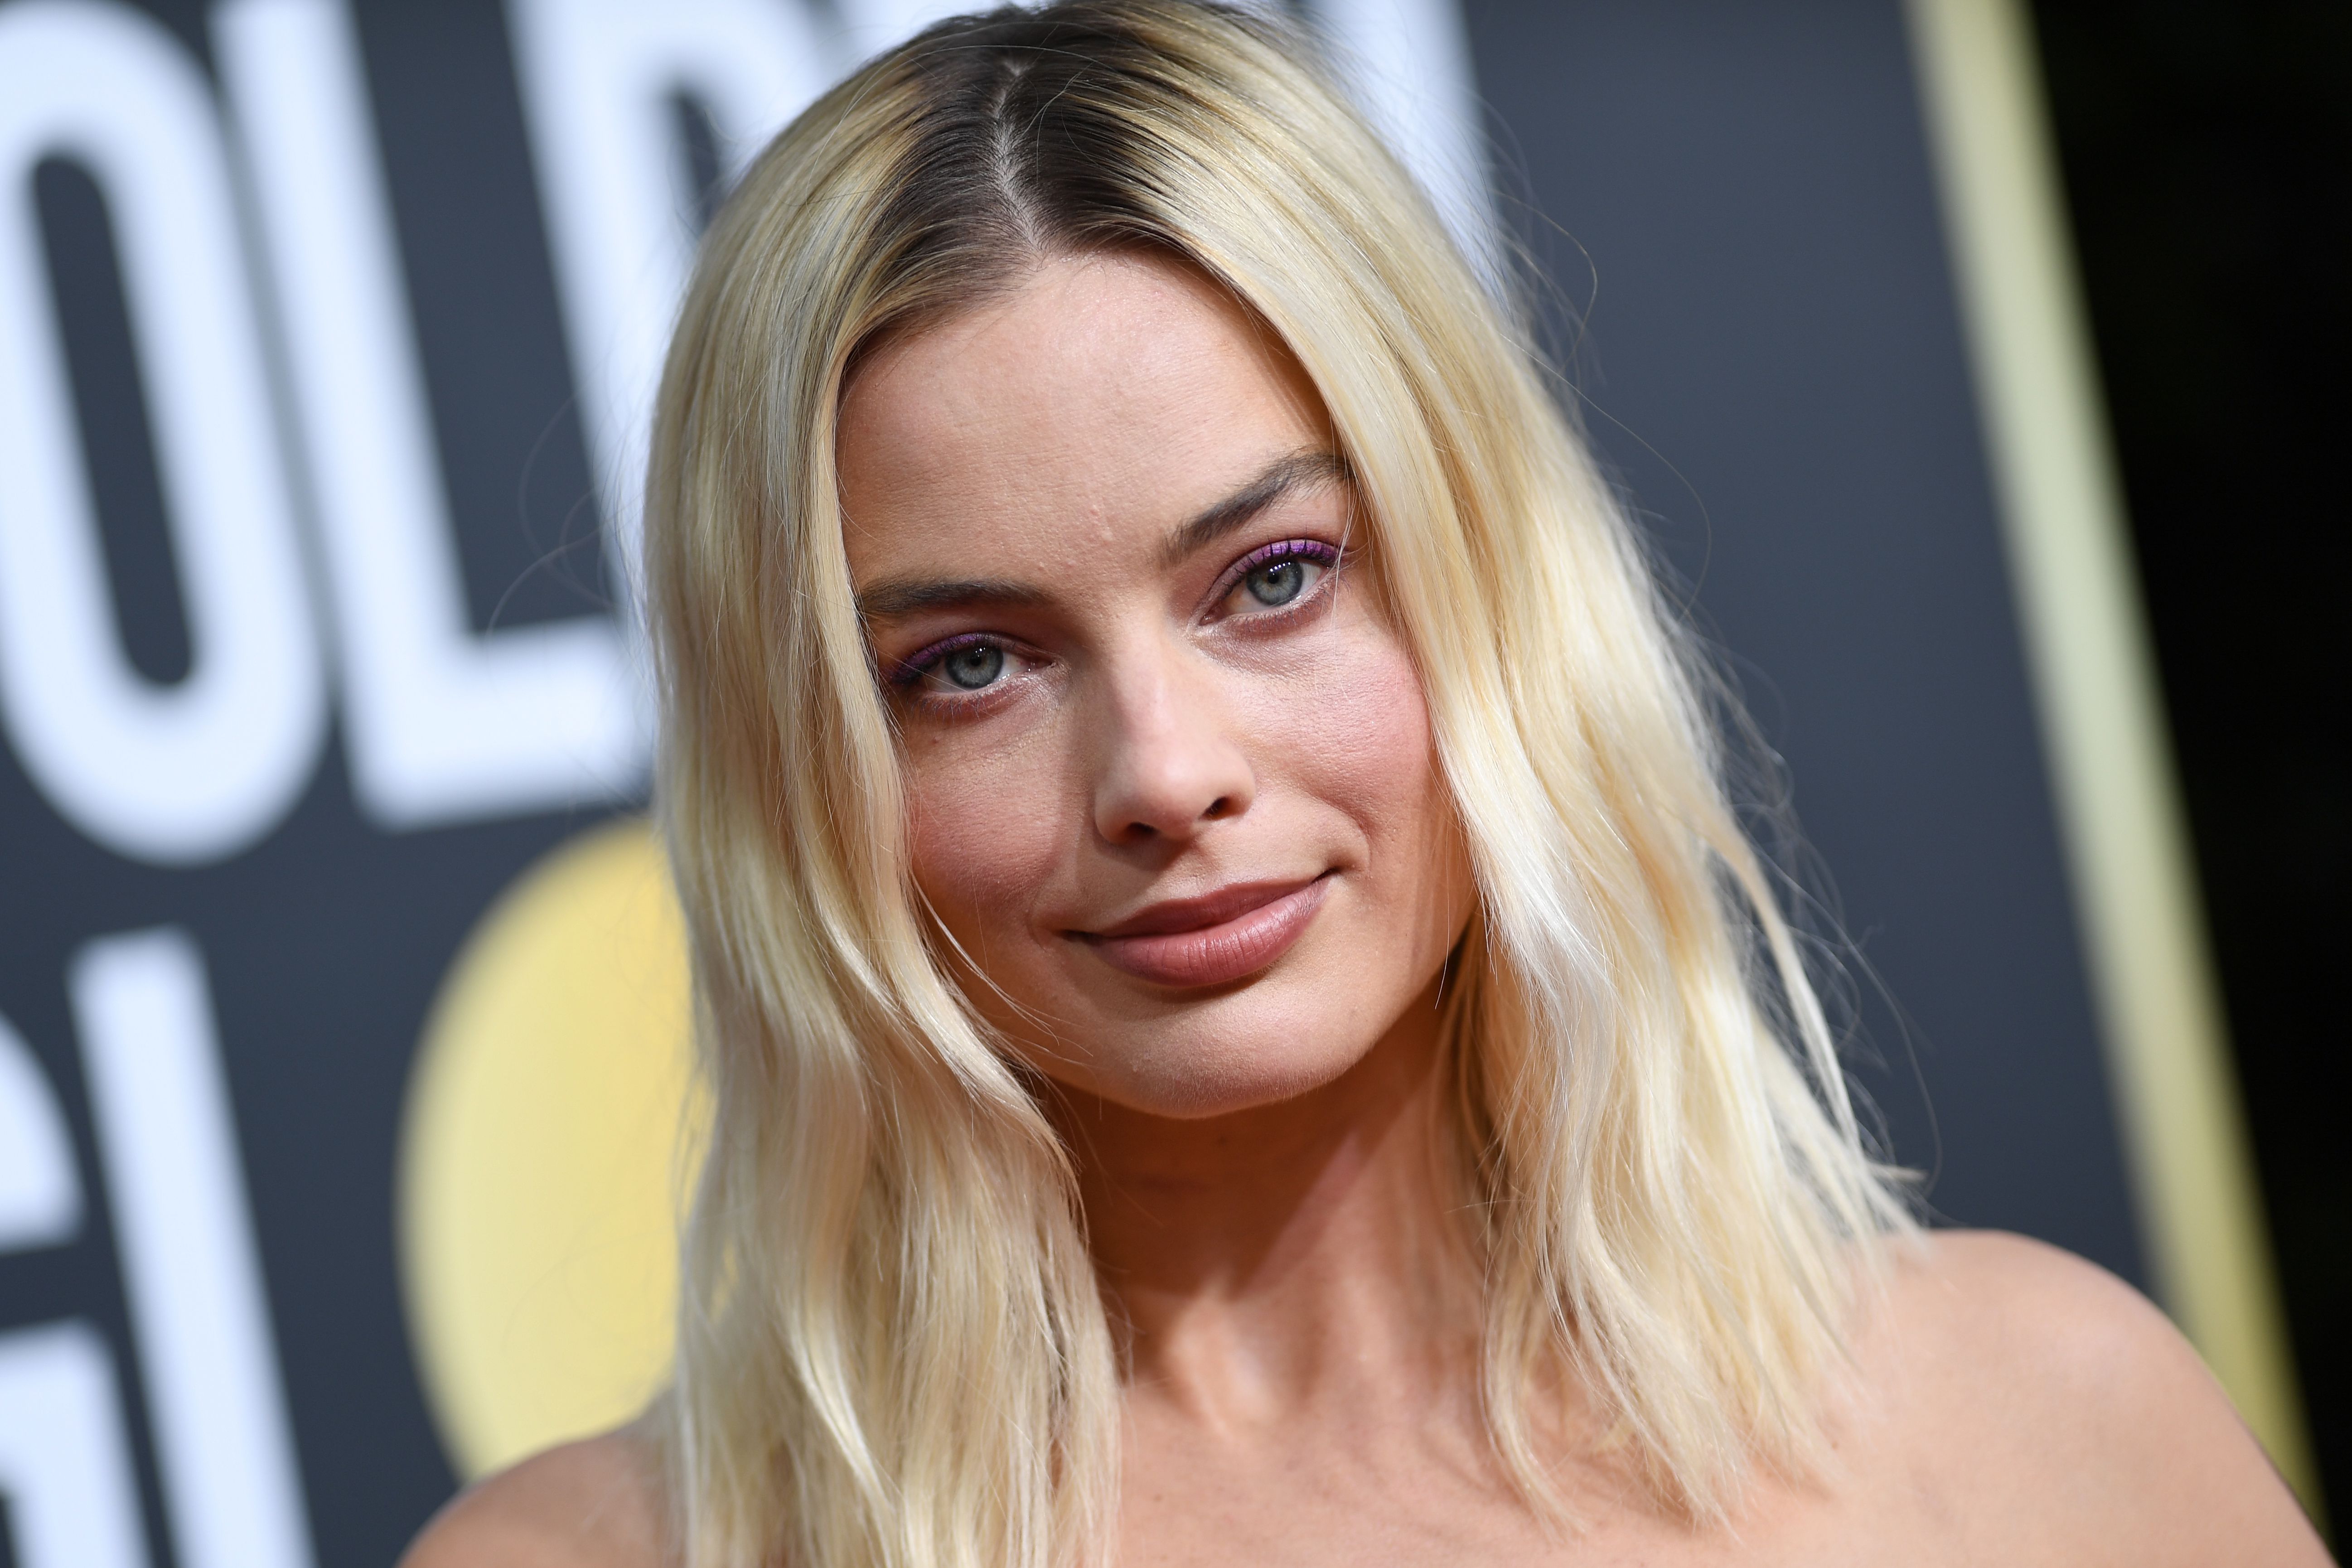 The New Barbie Movie Starring Margot Robbie – Le Petit Colonel